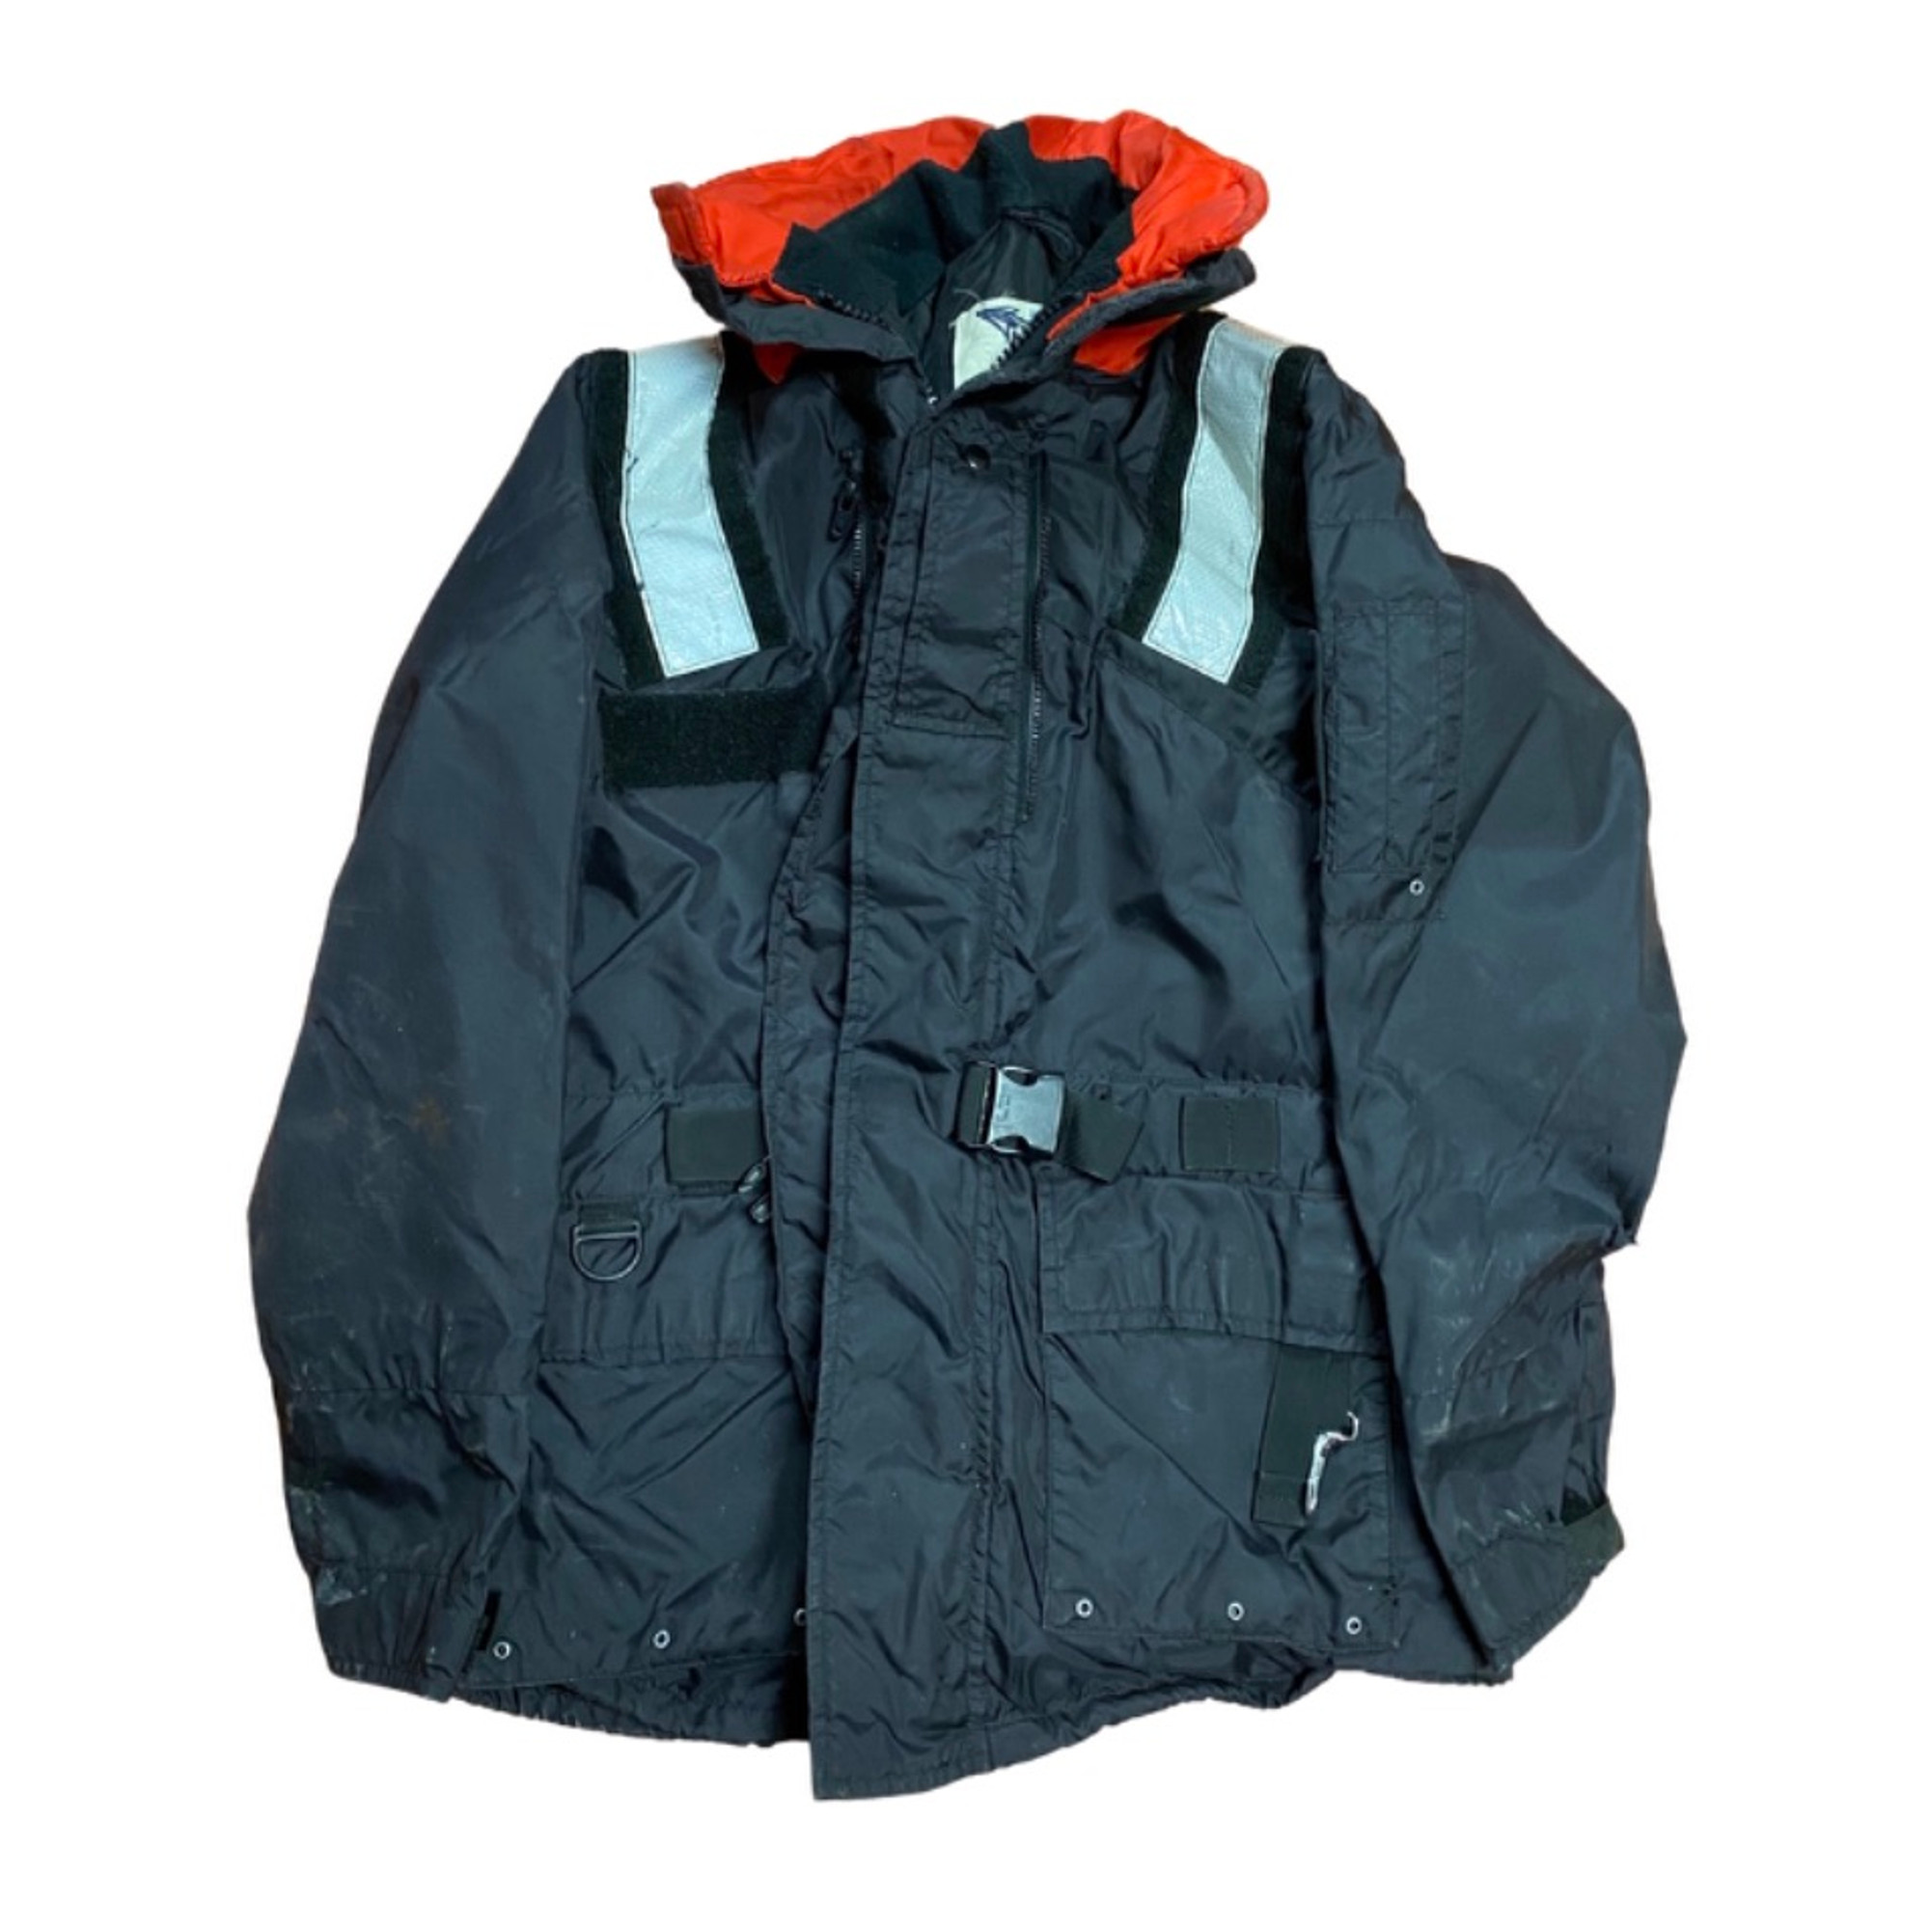 Canadian Armed Forces Mustang Survival Search & Rescue Jacket